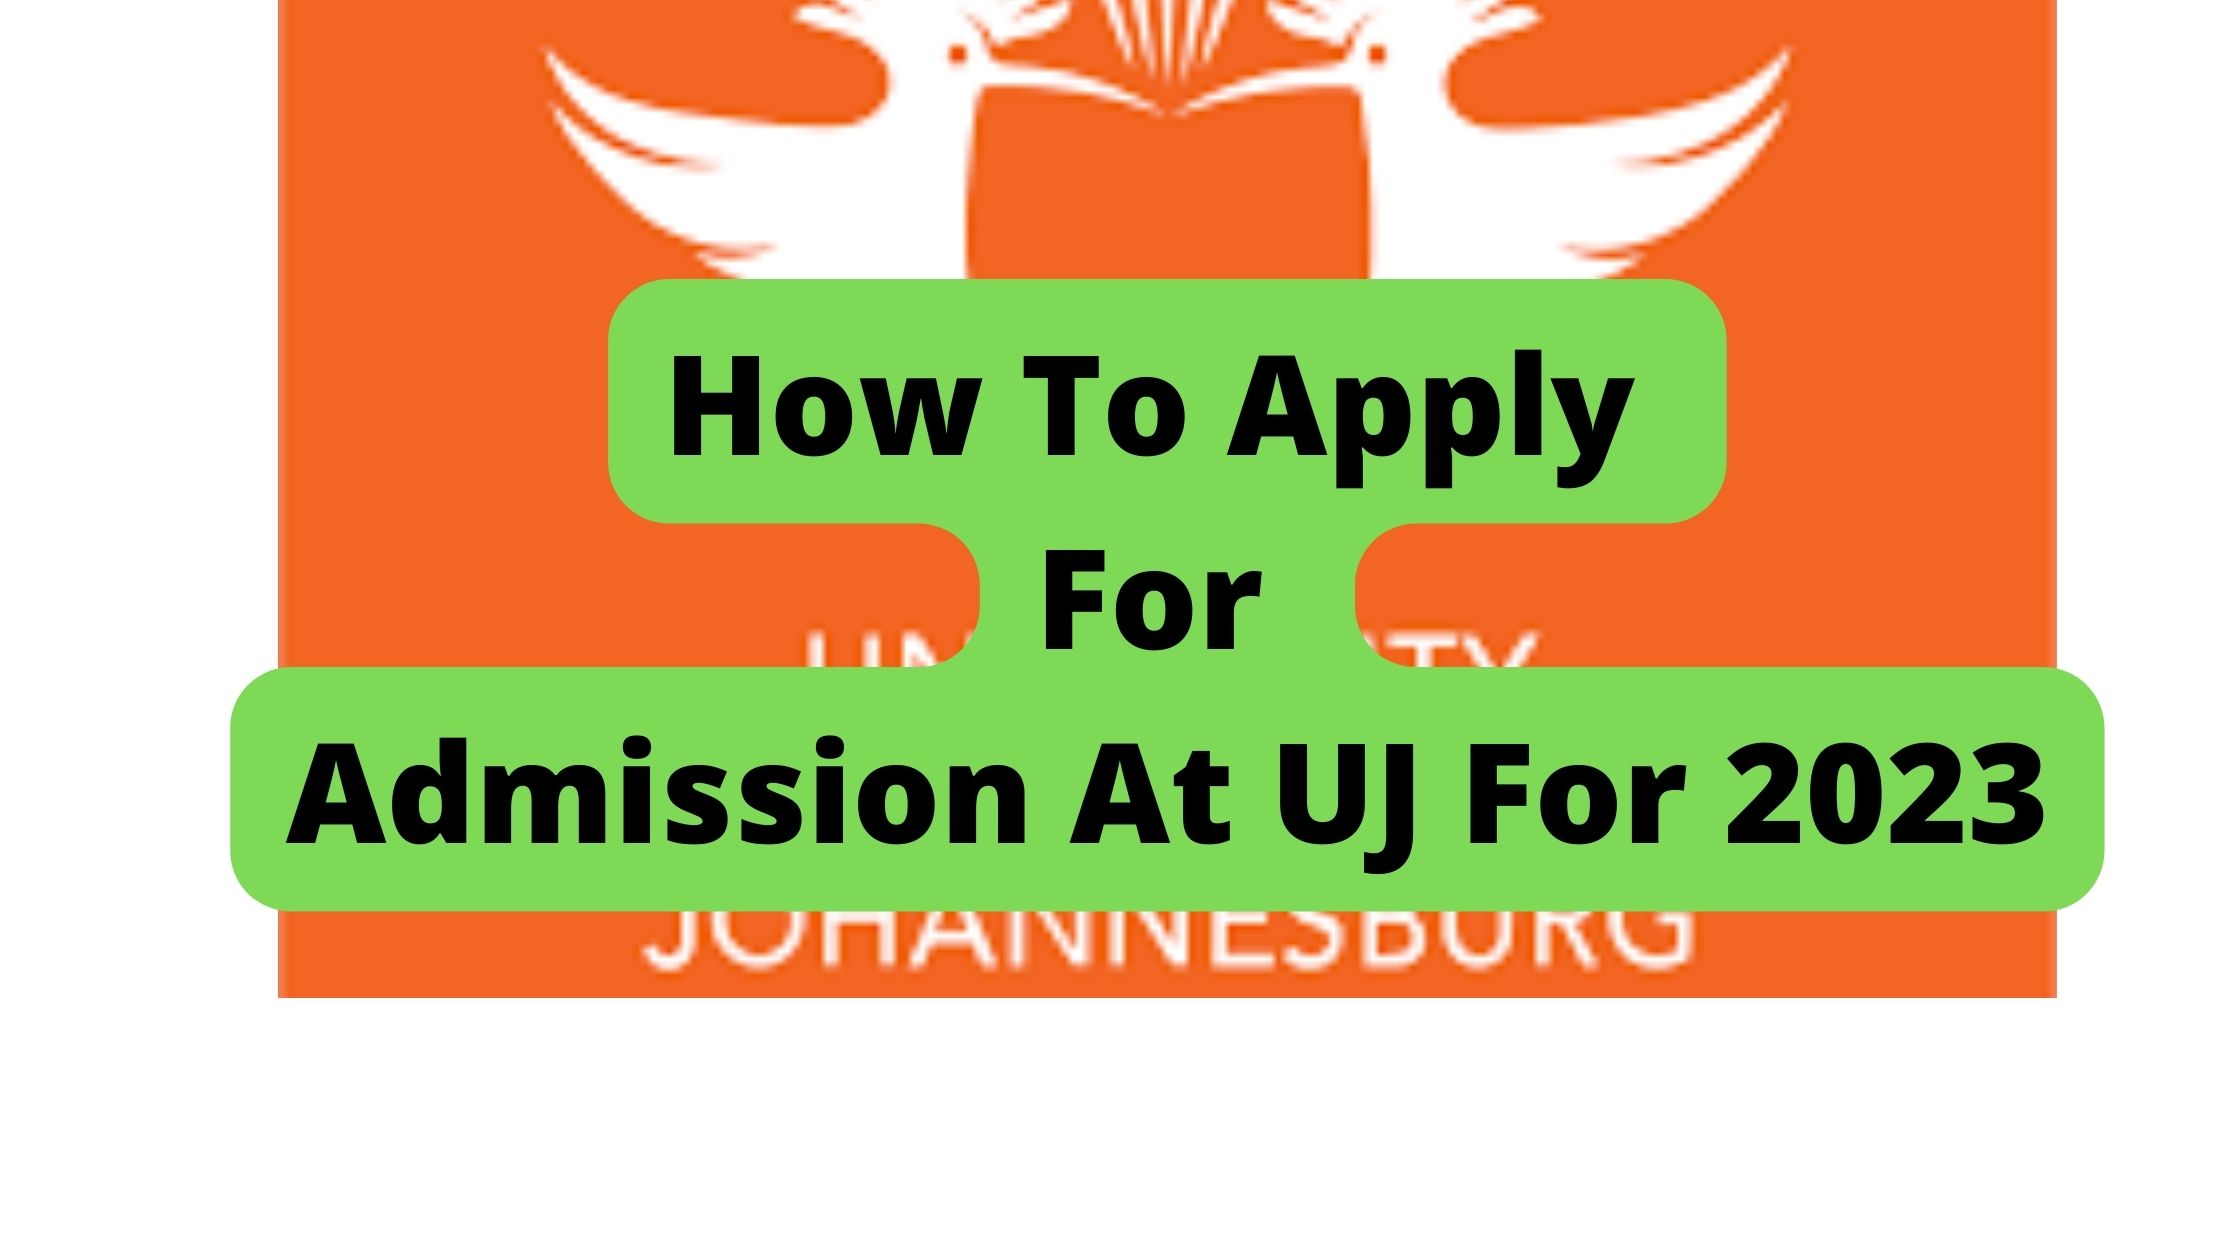 How To Apply For Admission At UJ For 2023